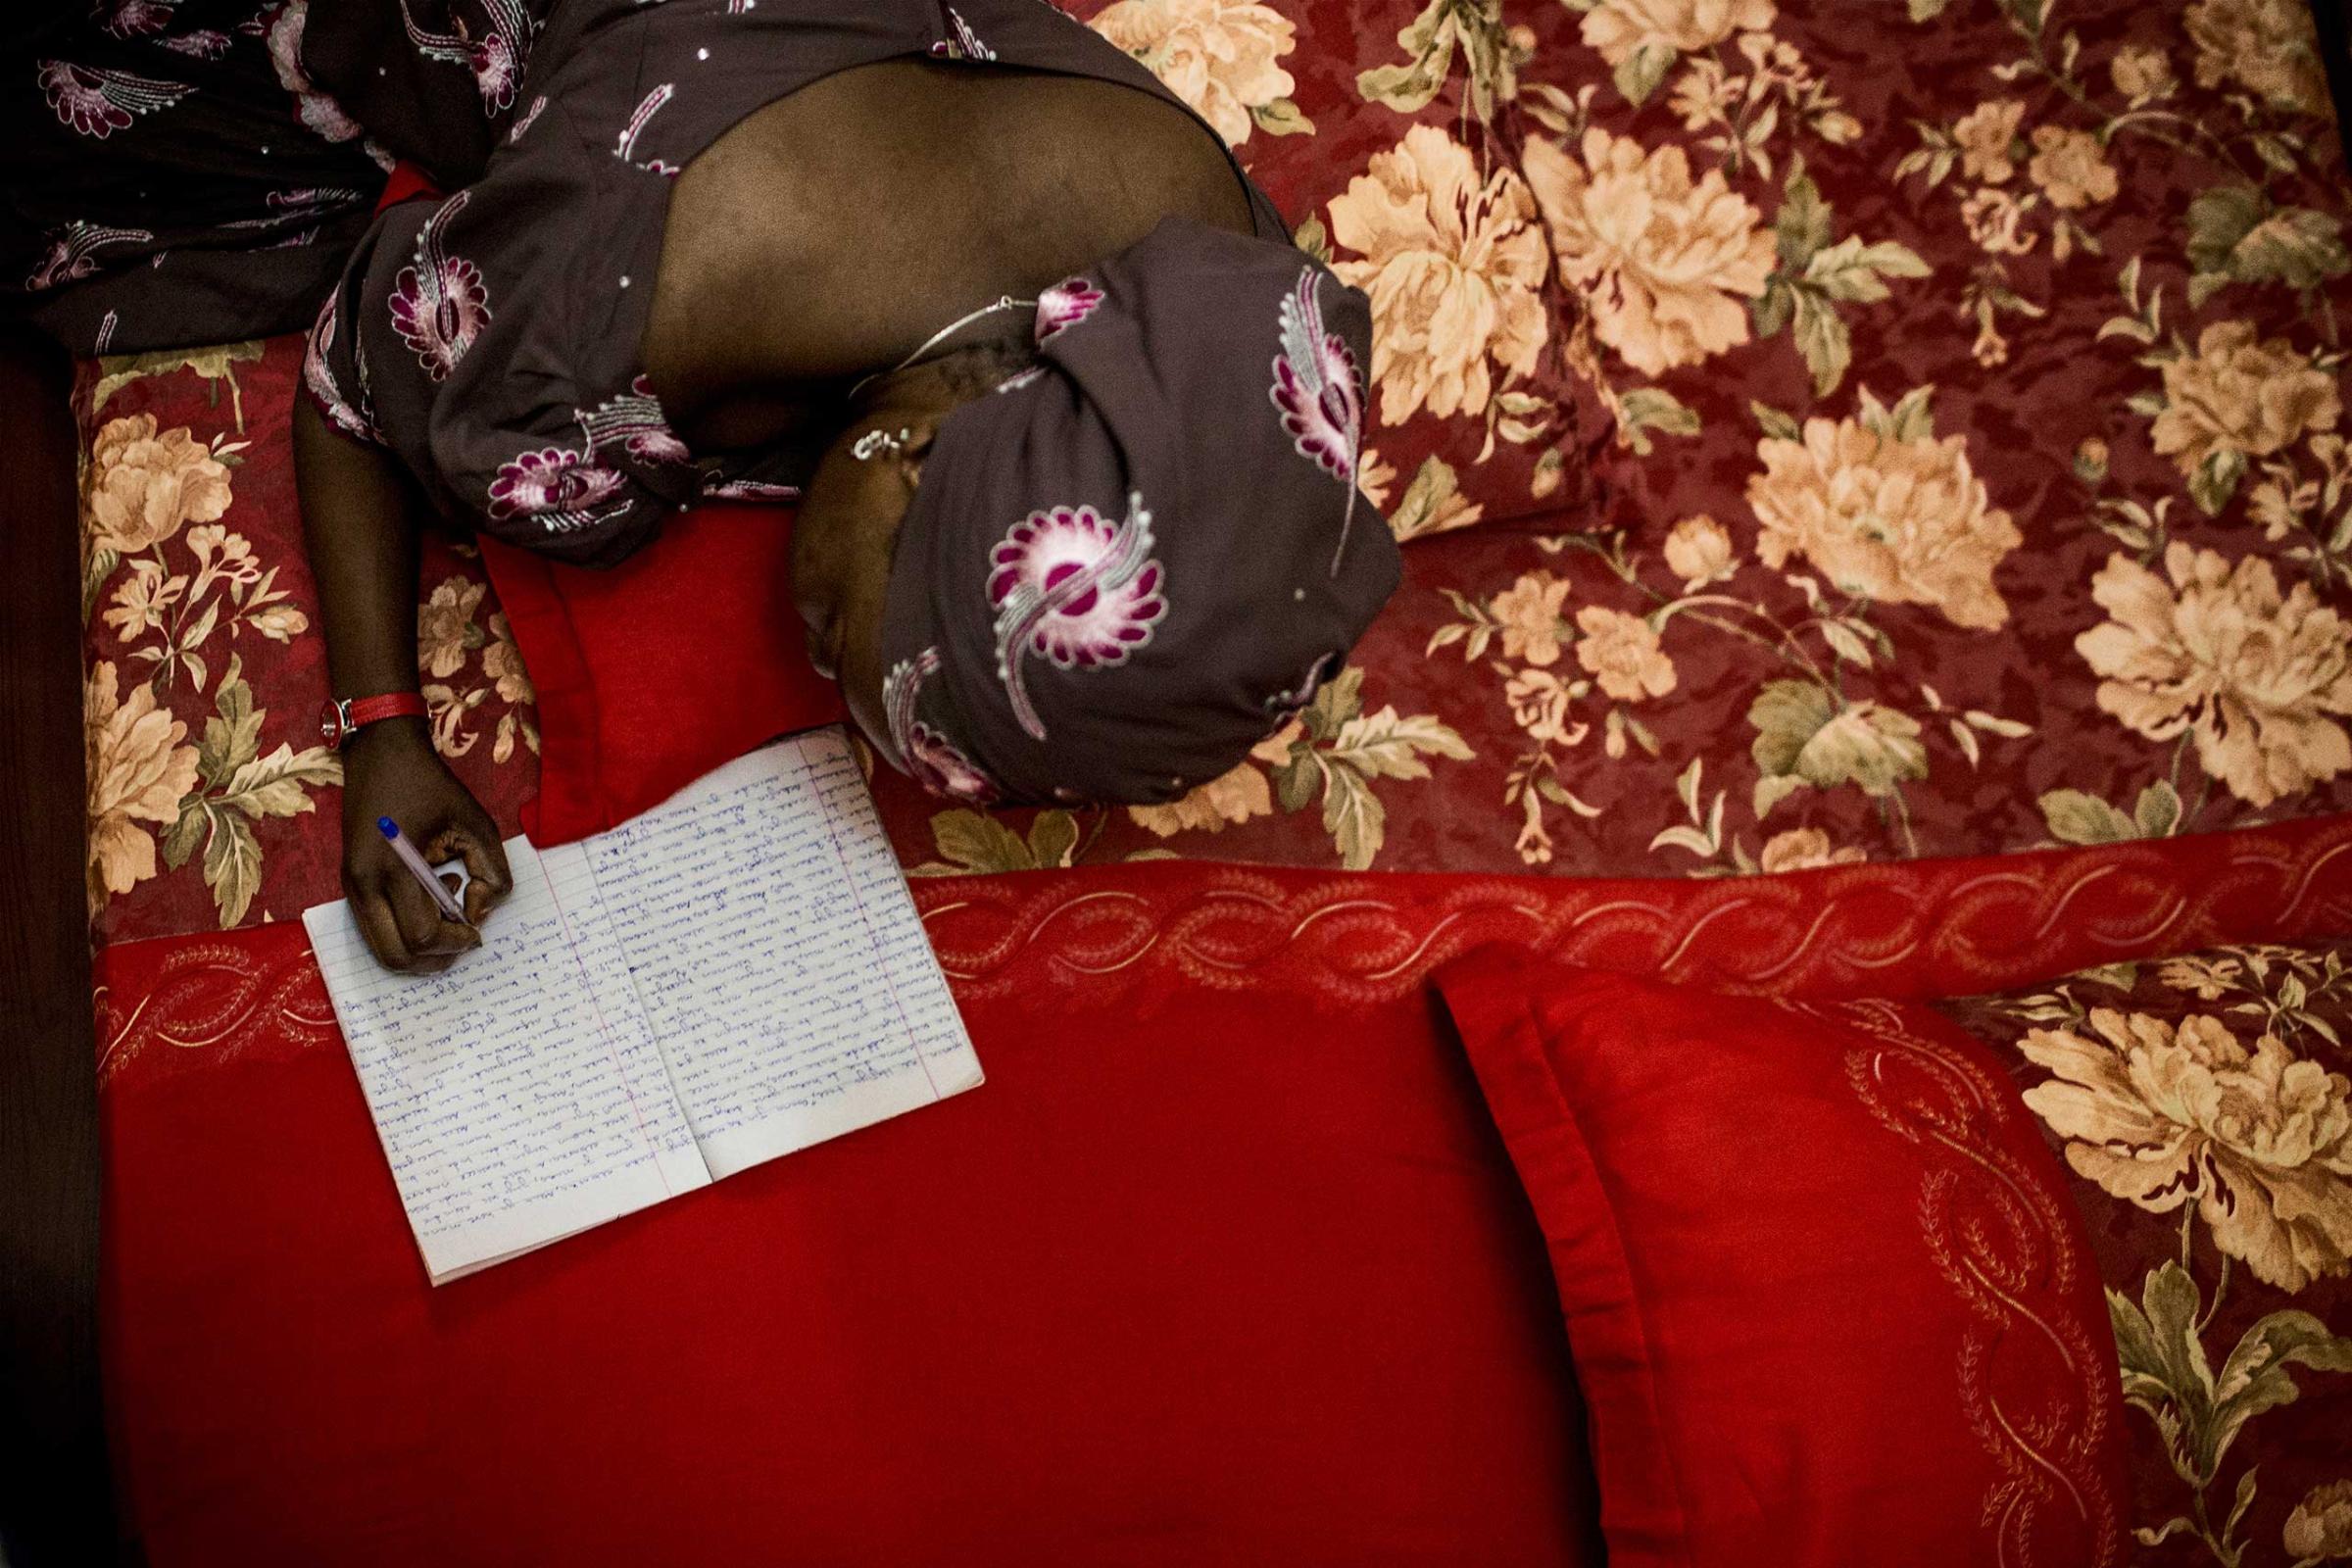 Khadija Gudaji works on her novel while laying in bed at her home in Kano, Northern Nigeria, Sept. 29, 2013.